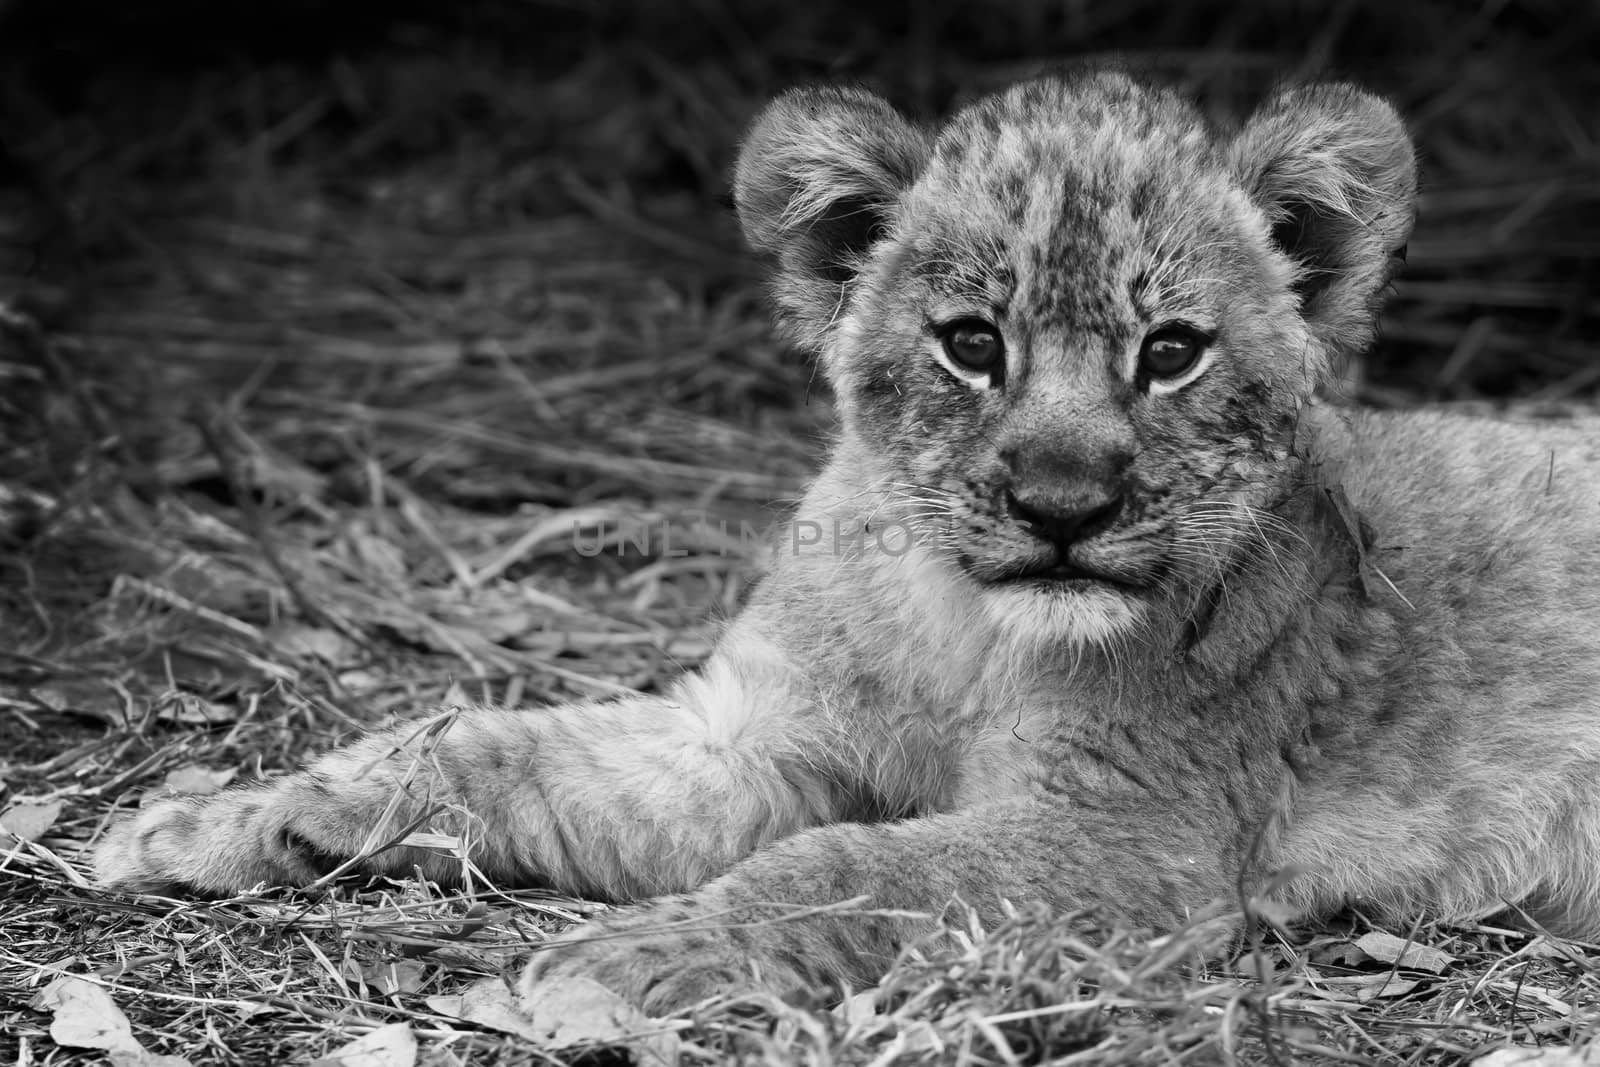 Artistic image of a cute lion cub in black and white